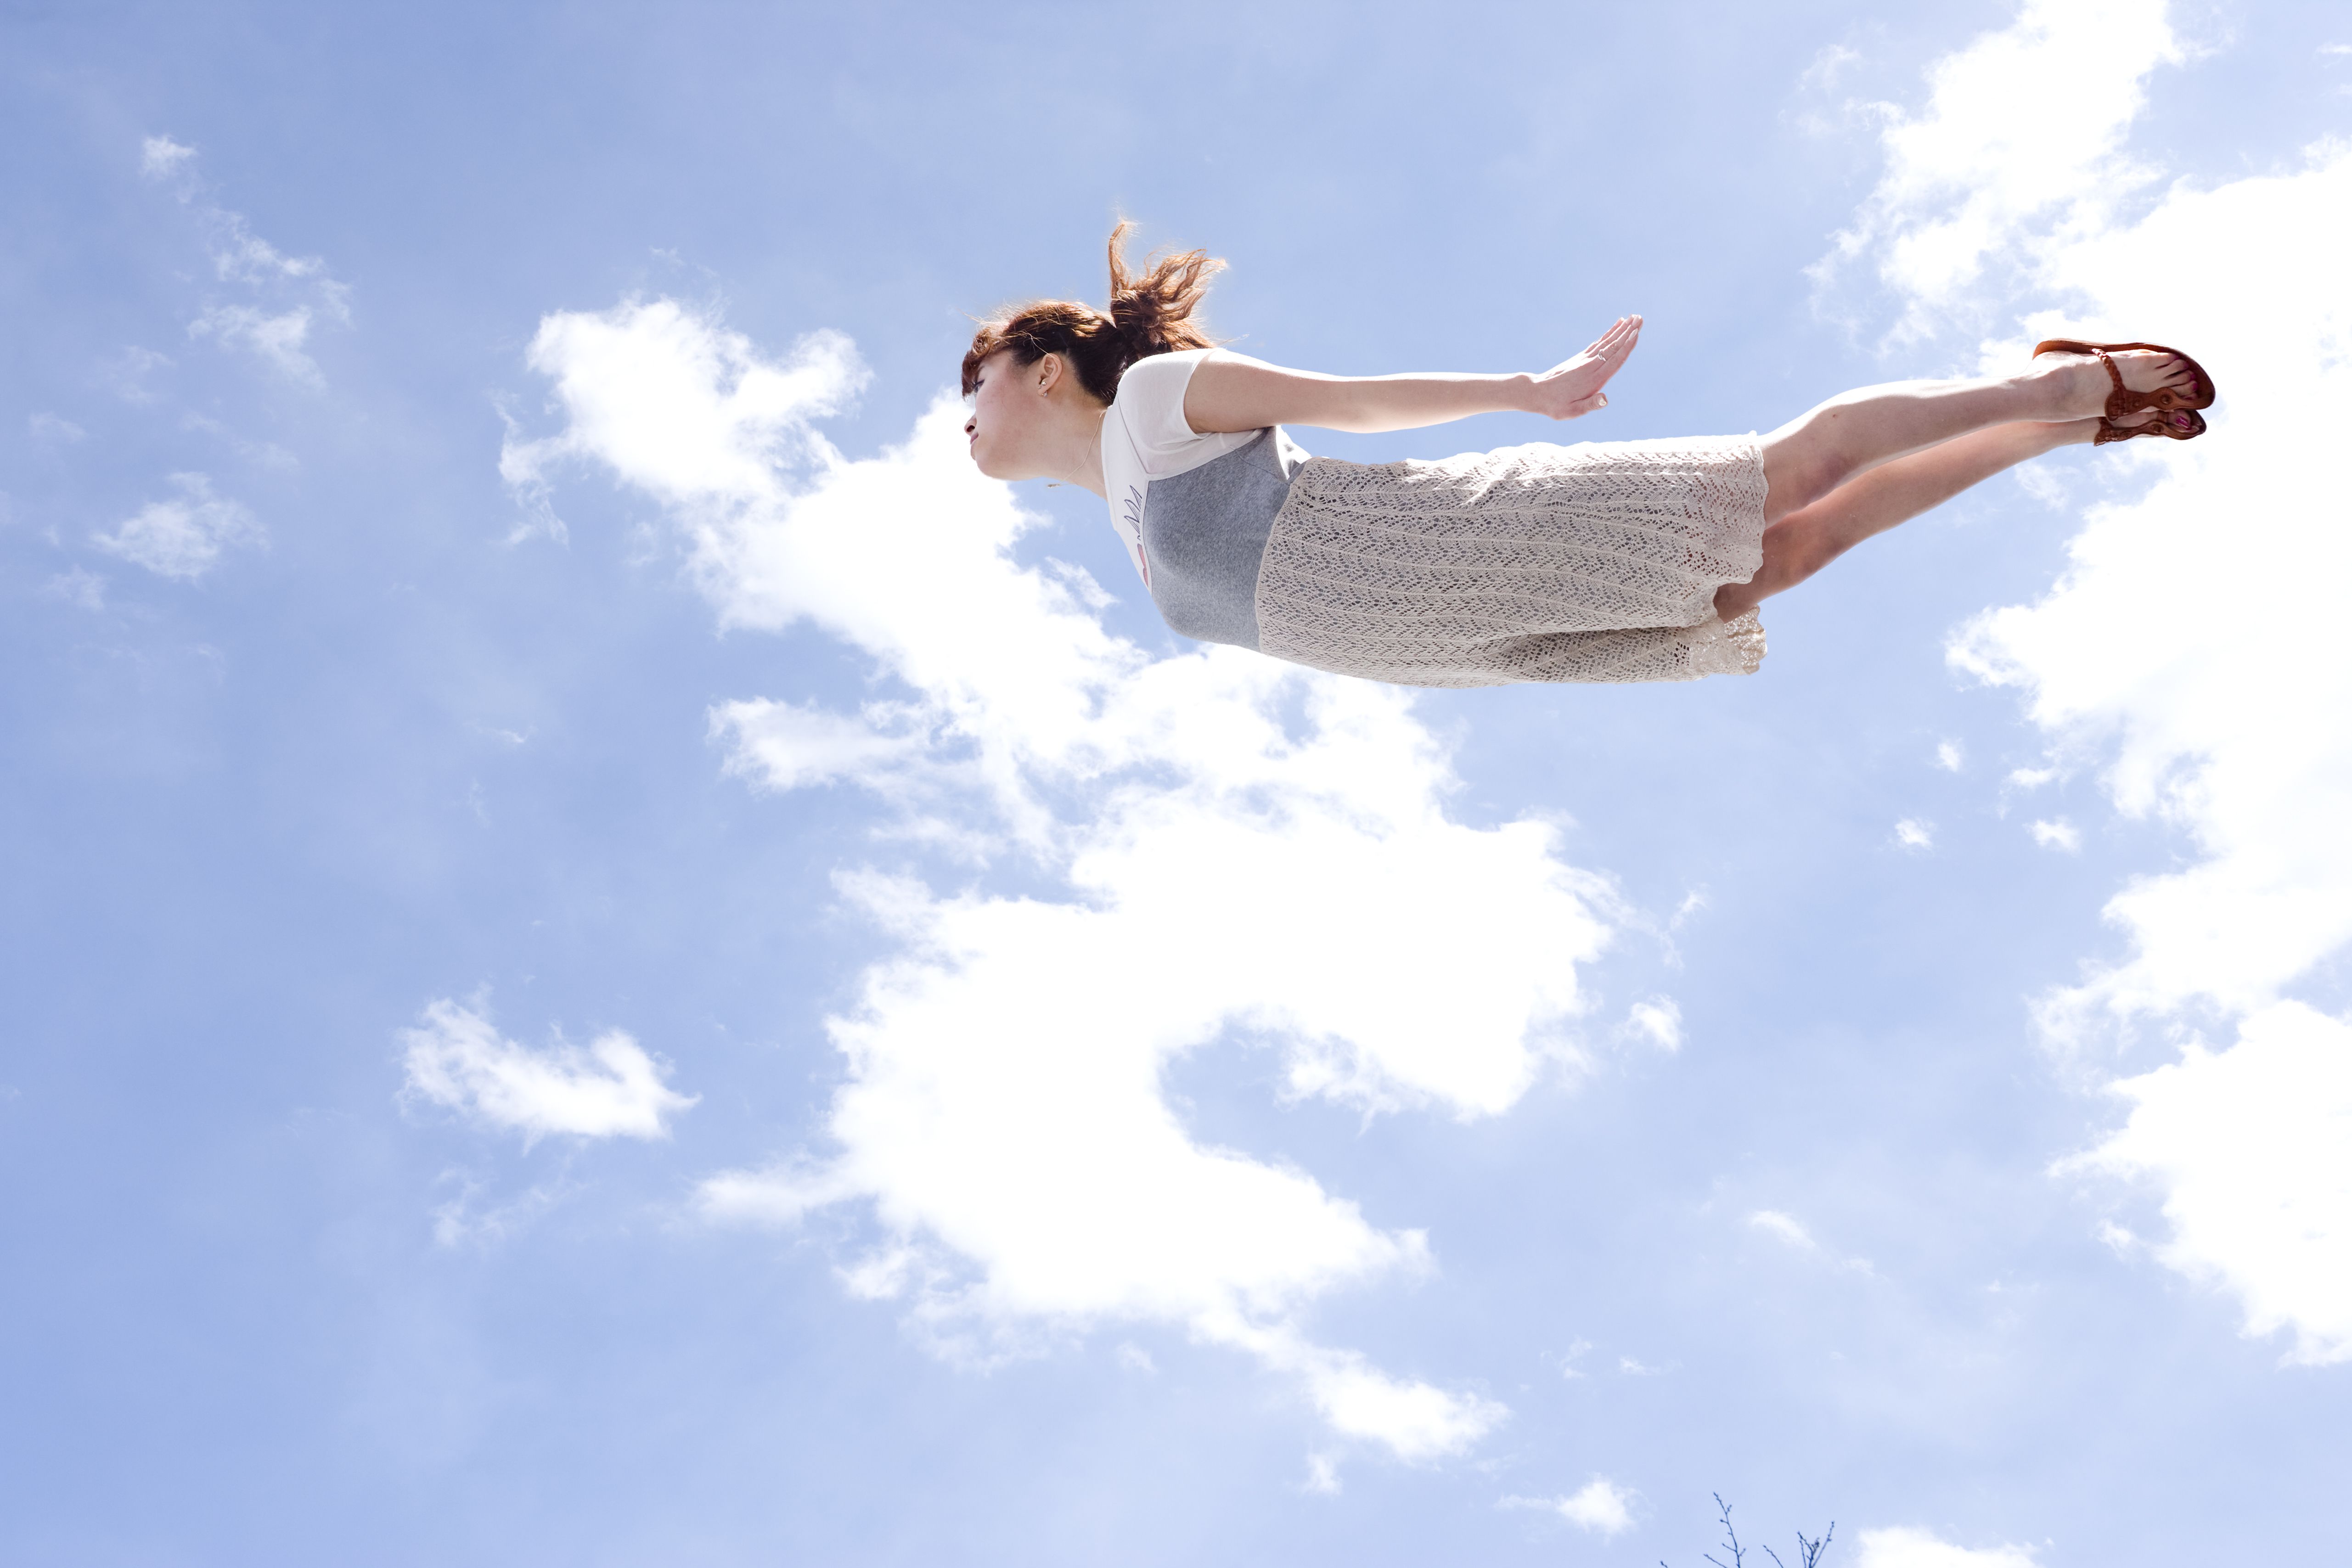 young-woman-flying-in-sky-low-angle-view-high-res-stock-photography-88972142-1551831652.jpg?crop=1xw:0.9999xh;center,top%26resize=480:*&f=1&nofb=1&ipt=e0febe39f013917f284215f32c6d74fc46ffc4710d3152268f91abb50ace4b07&ipo=images